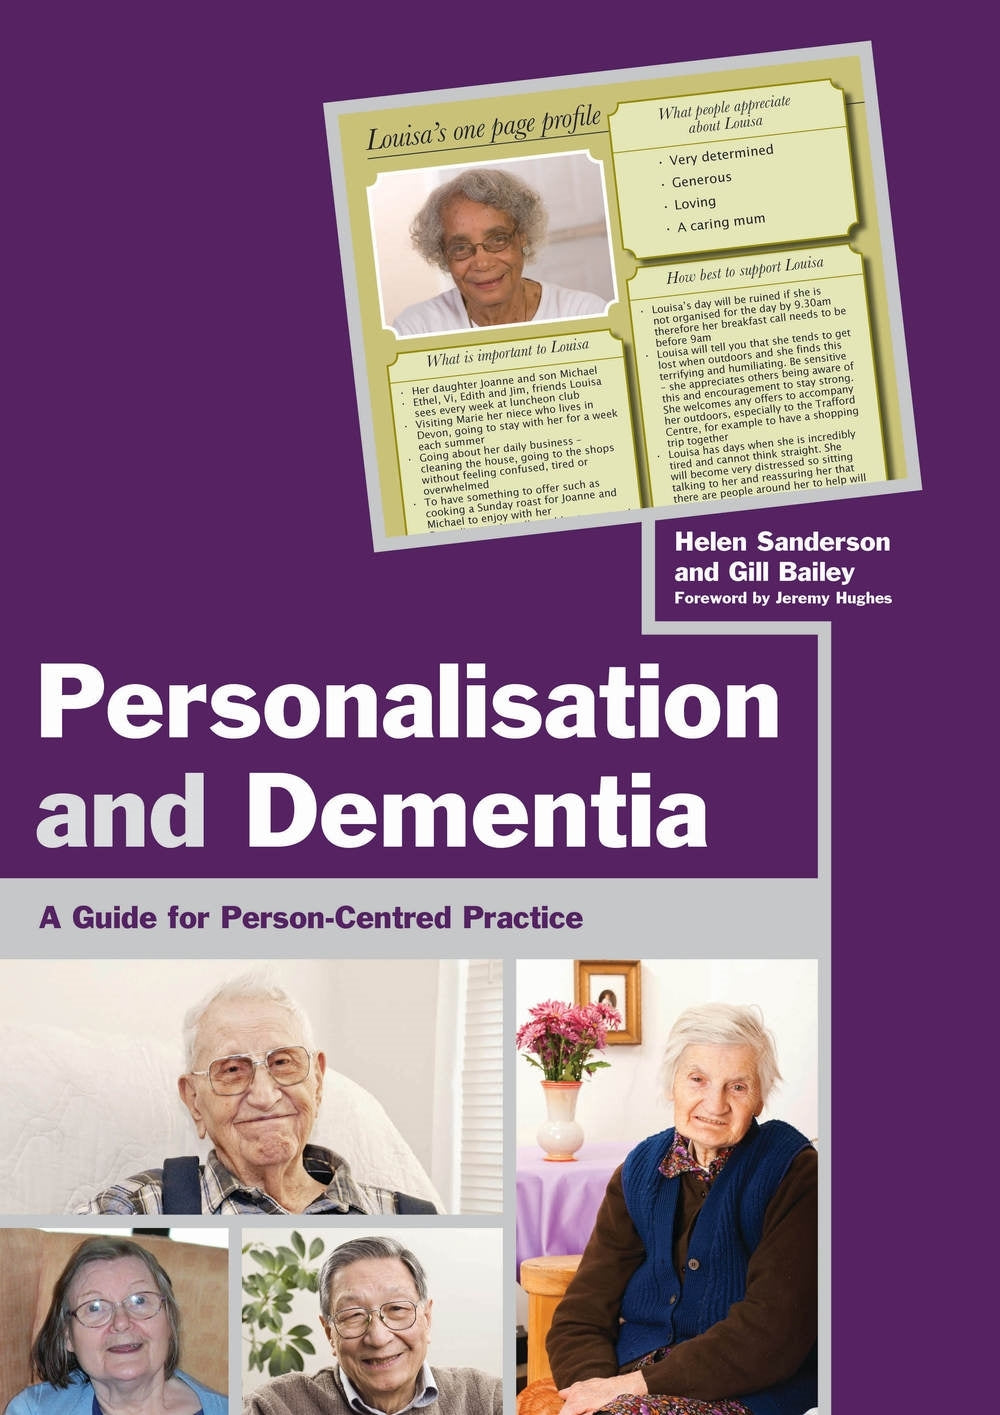 Personalisation and Dementia by Helen Sanderson, Gill Bailey